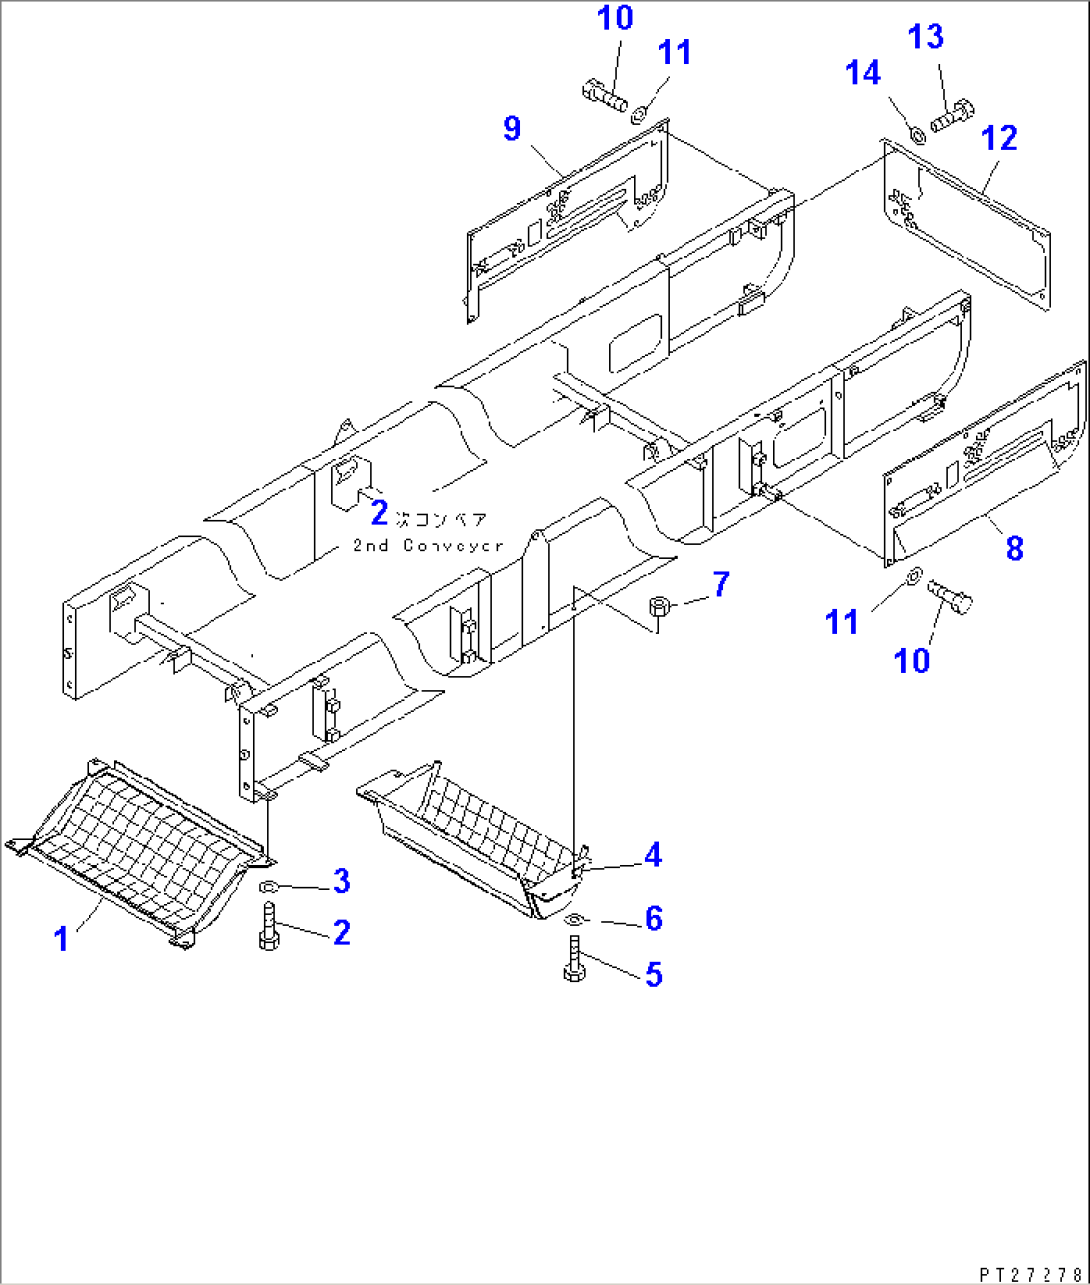 2ND CONVEYOR (INNER PARTS) (8/10) (600MM WIDTH) (WITH EMERGENCY SWITCH)